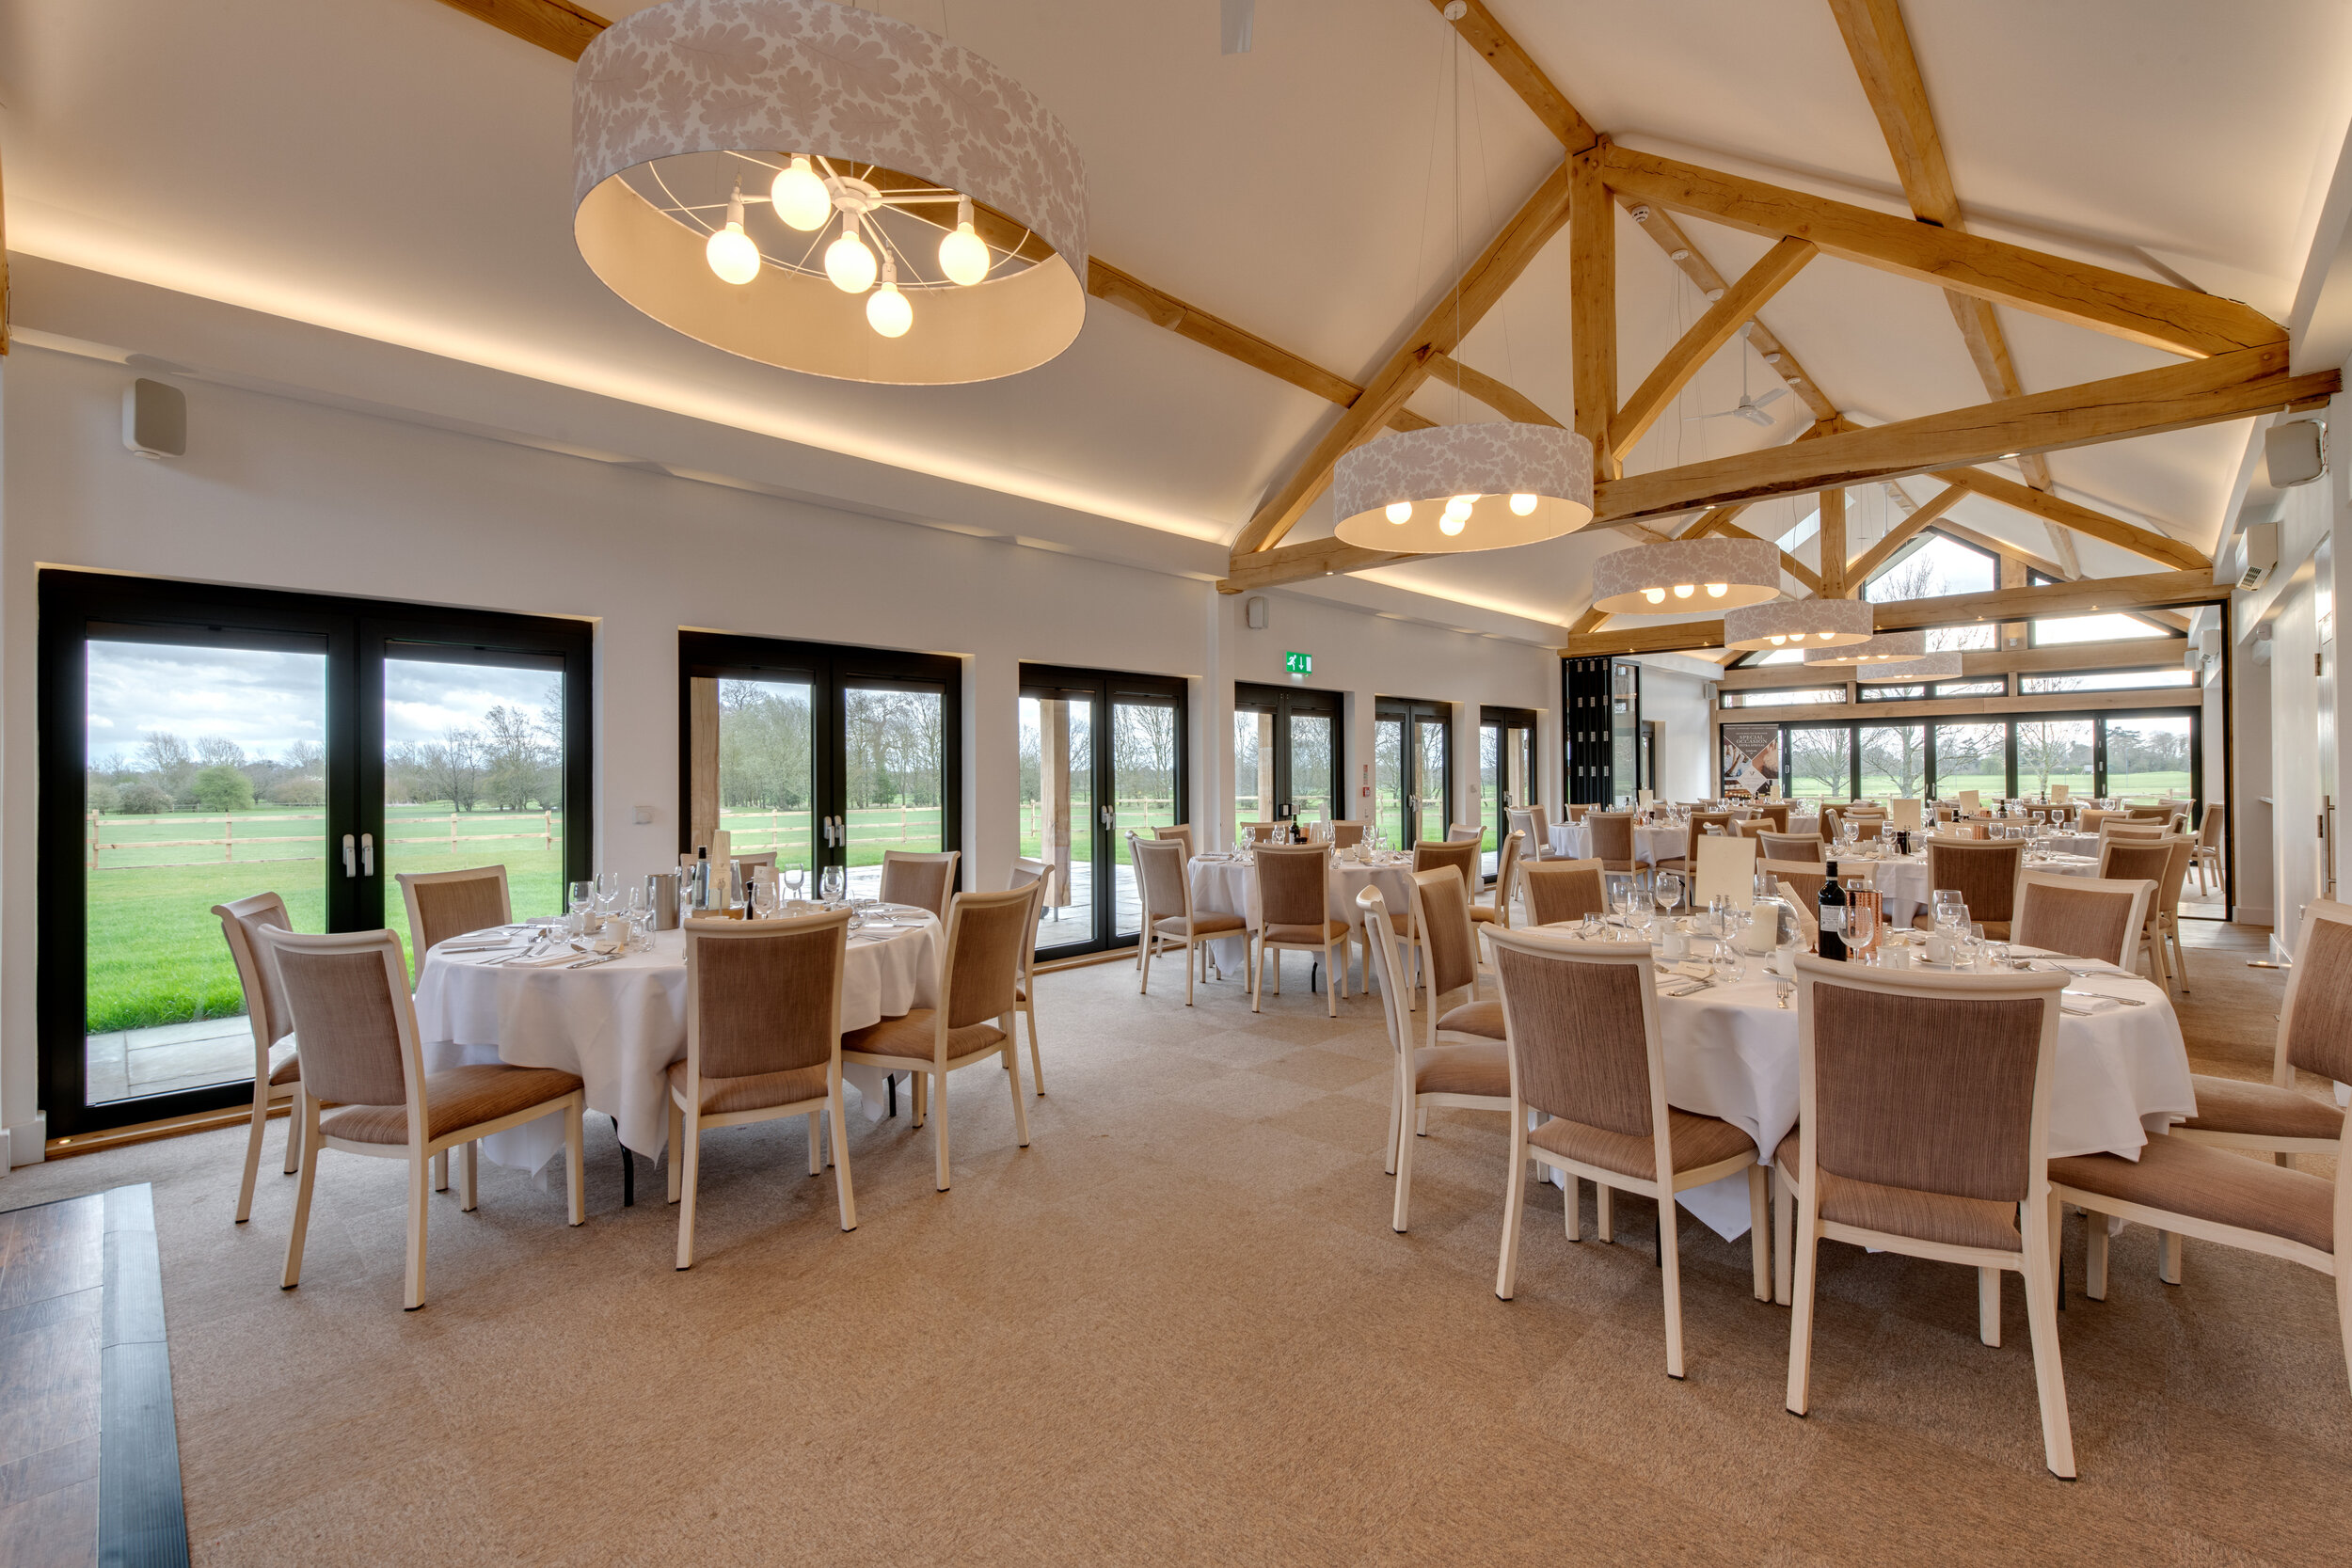 The Terrace at Fynn Valley, event venue, large groups, dinners, parties